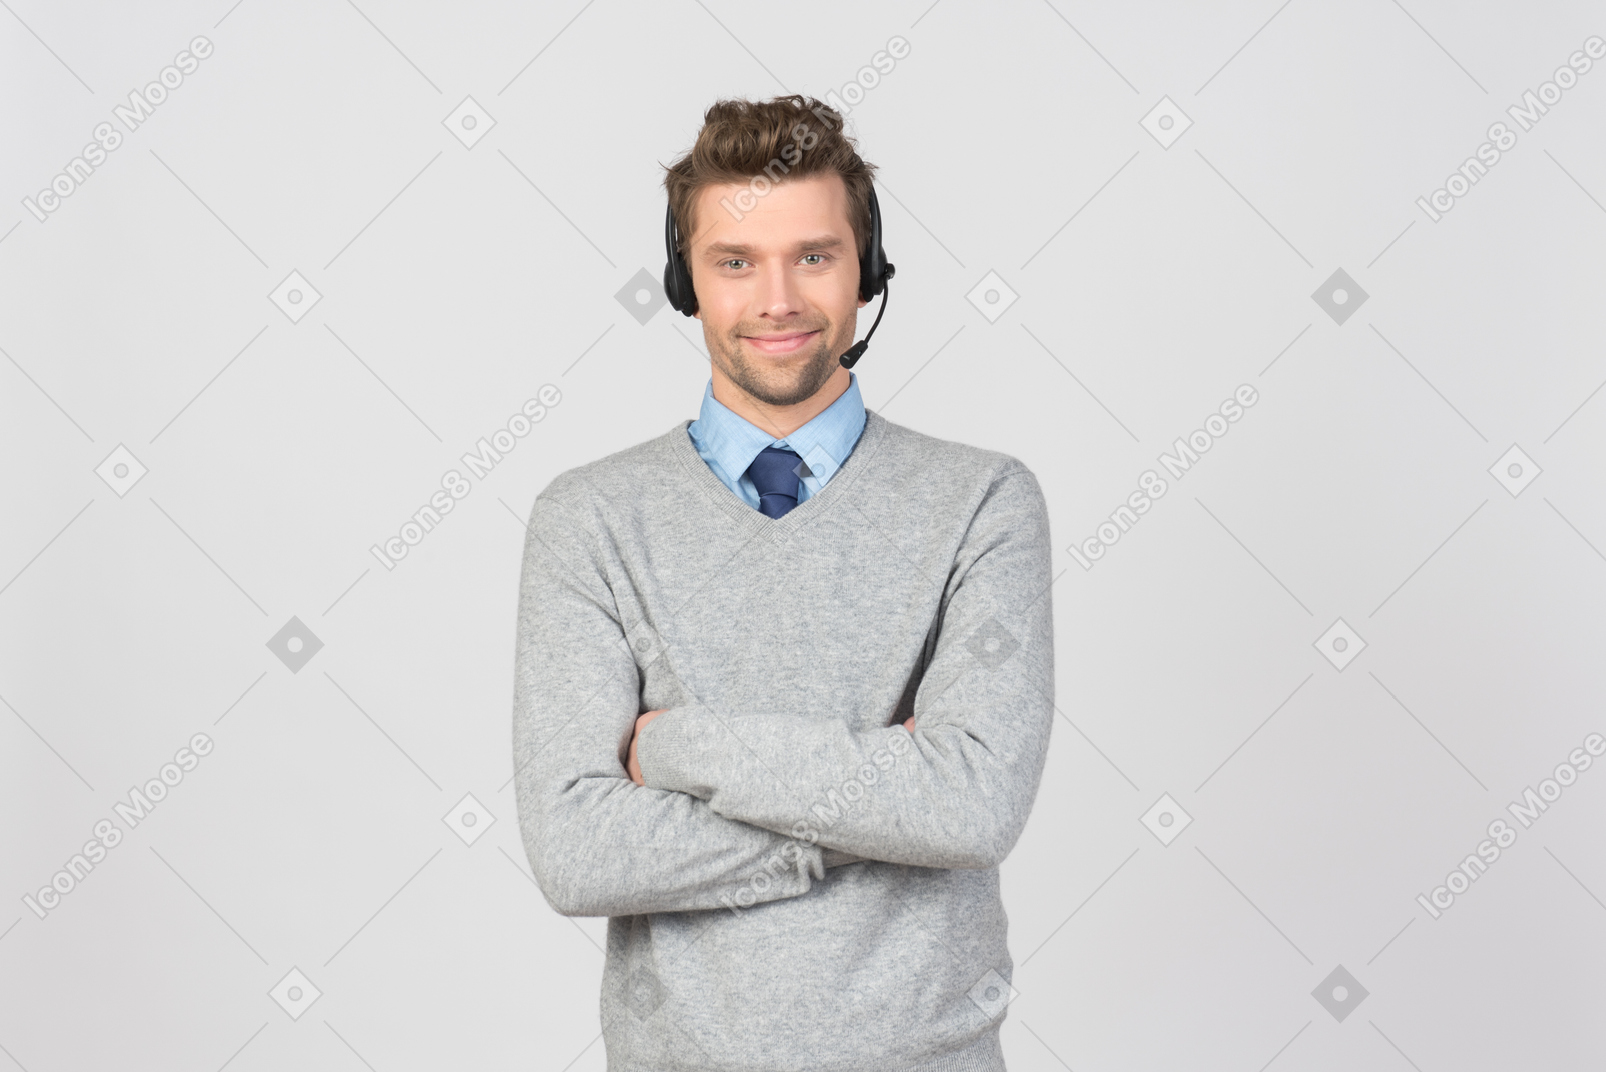 Call center agent standing with his headset on and hands folded